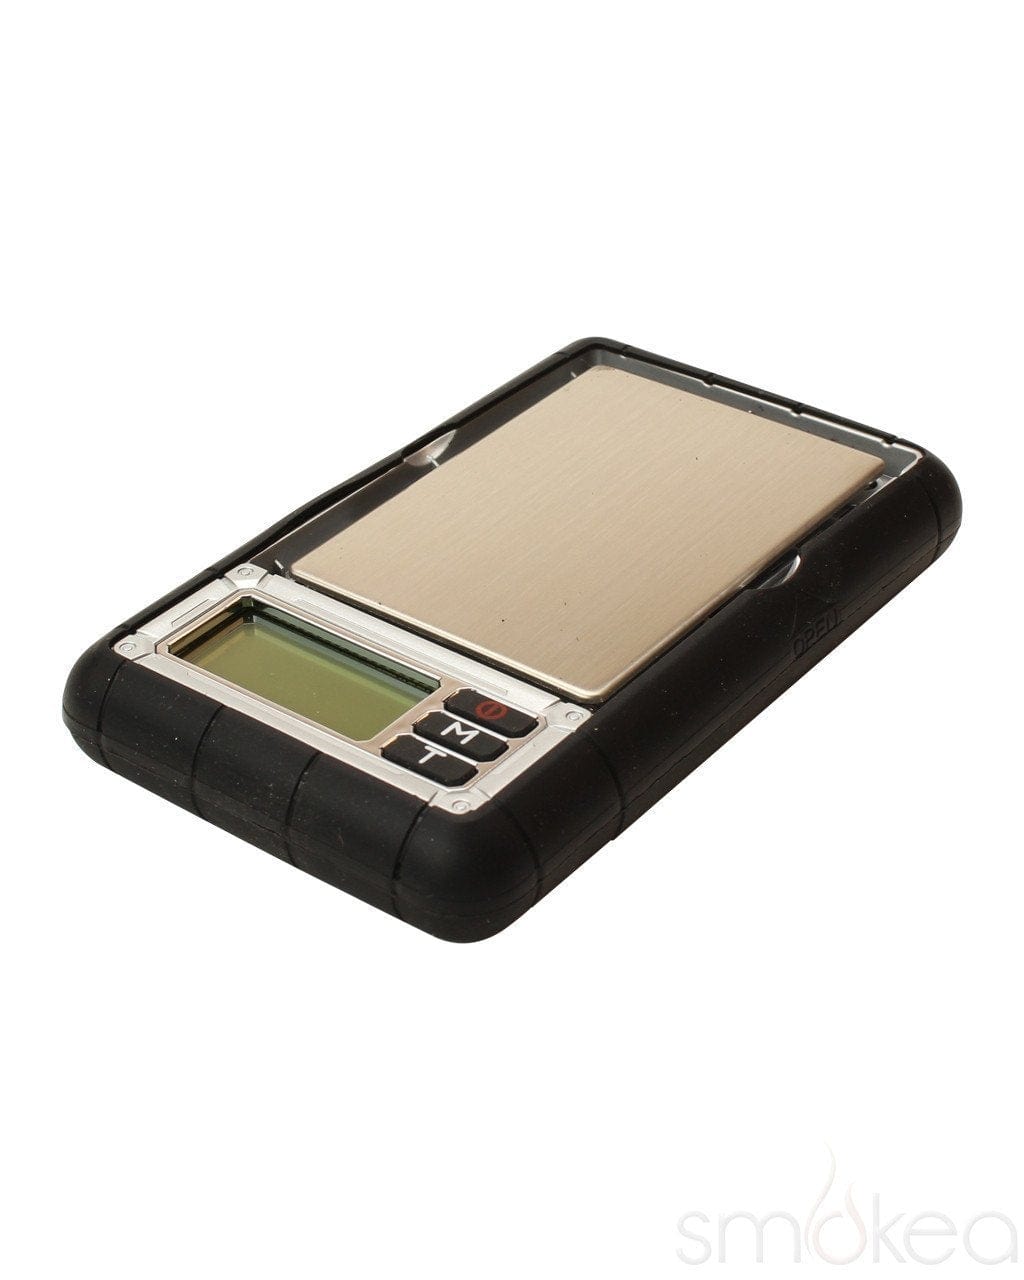 My Weigh Pocket Dura 300 Precision Jewellery Scale Tray Tools Pouch 300g 0.01g D2